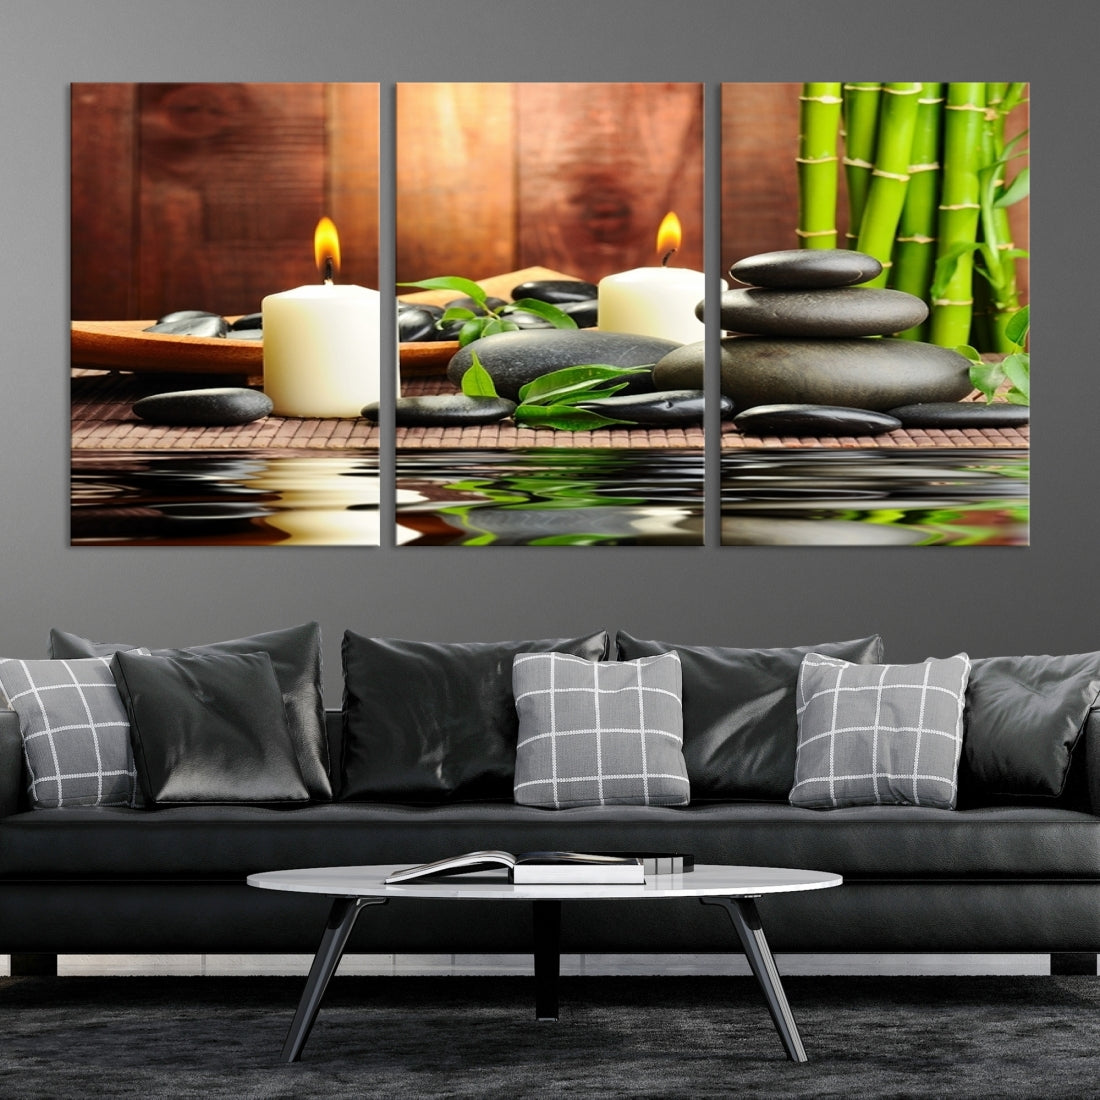 Eastern Philosophy Meditation with Zen Stones and Candles Canvas Print